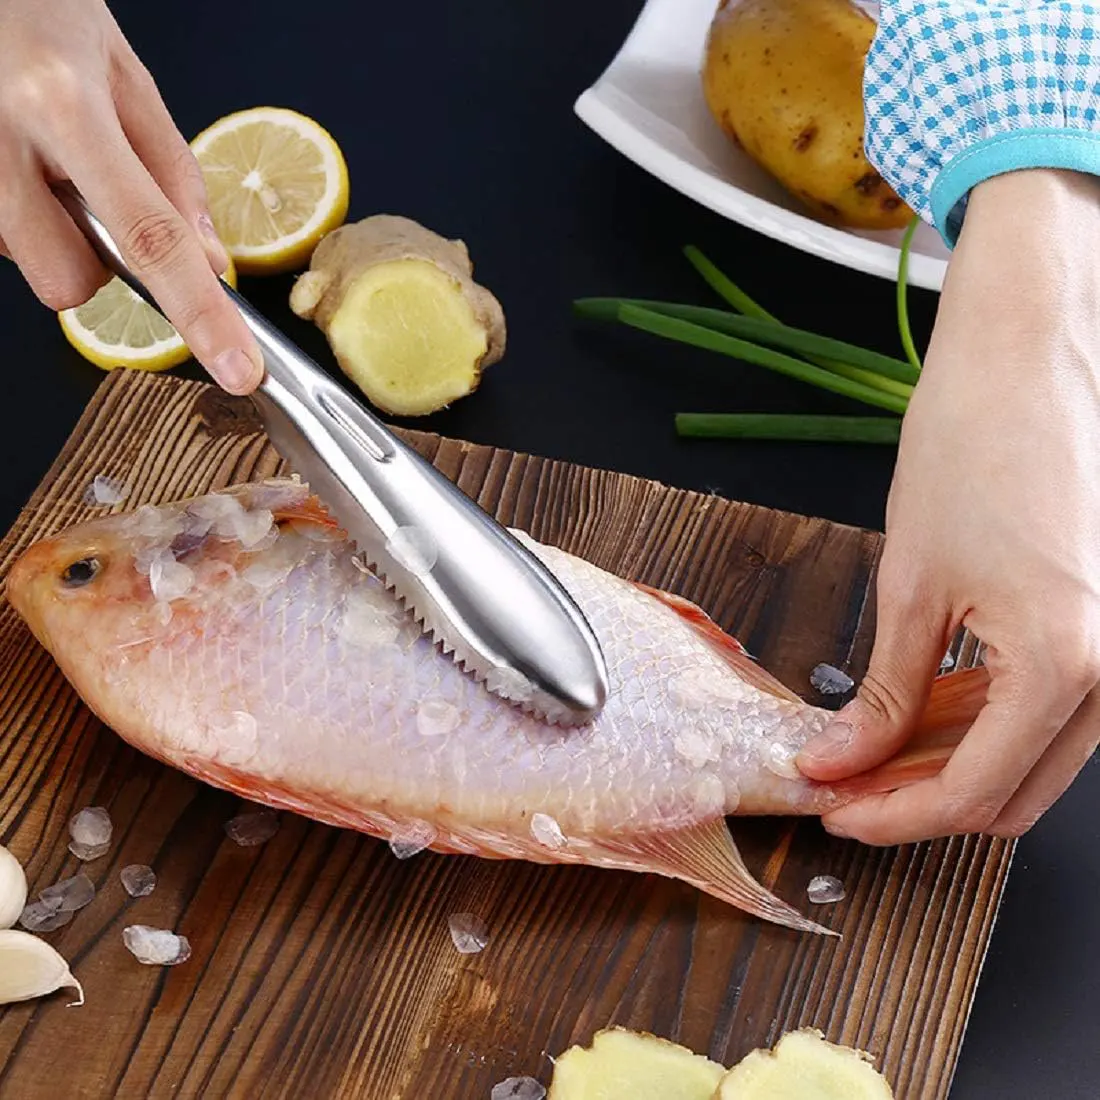 Stainless fish scaler